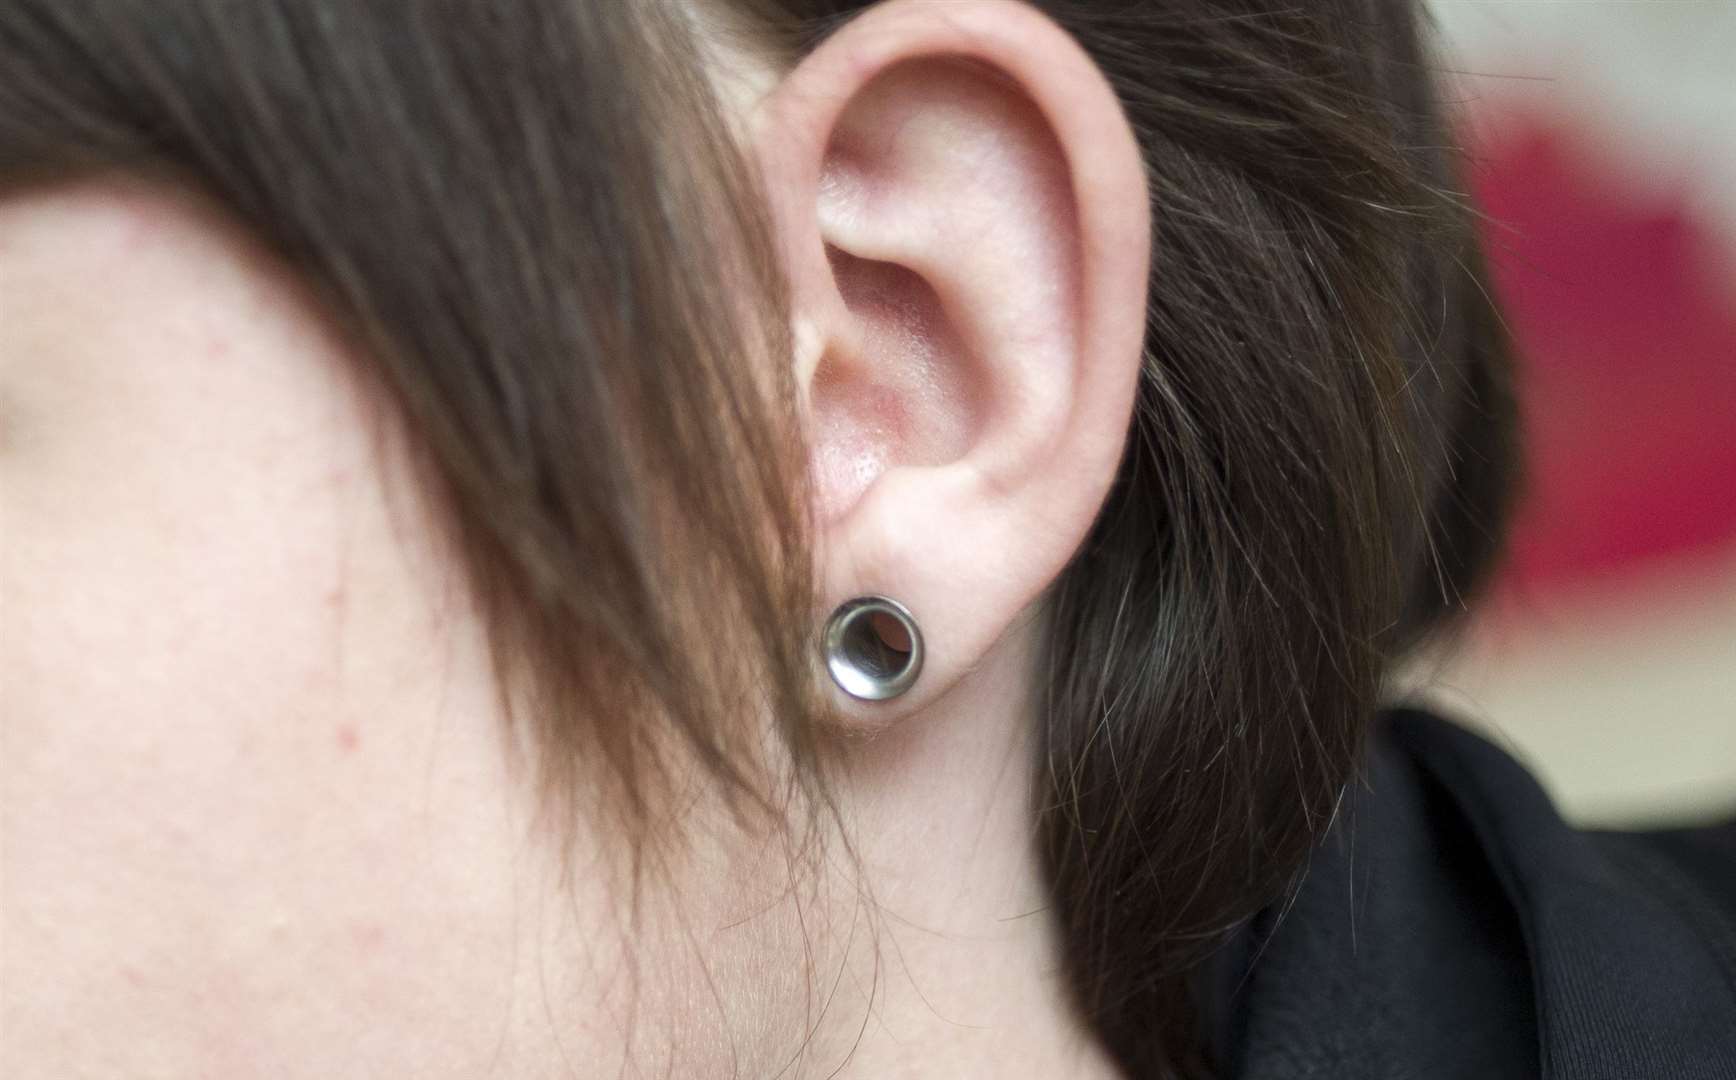 Should police officers be able to wear ear stretching piercings?